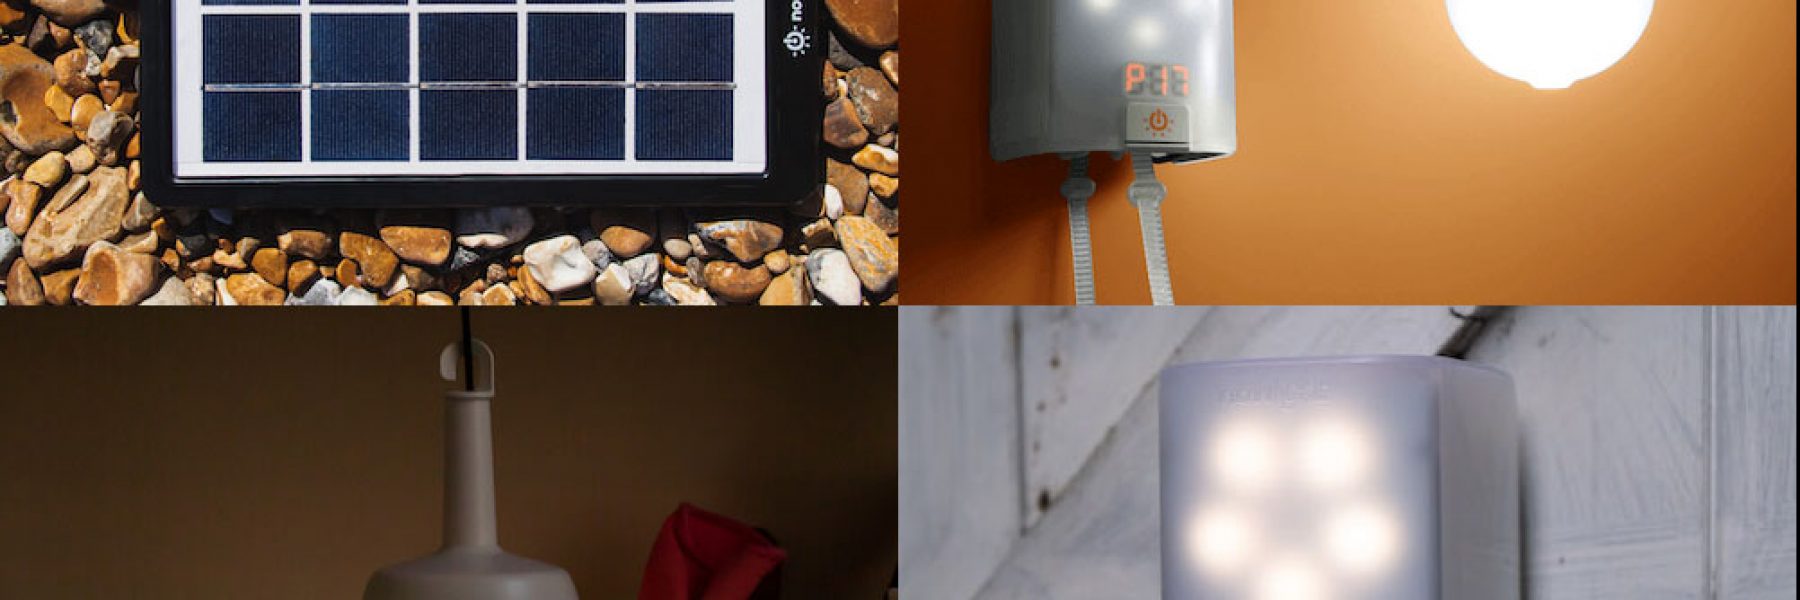 Deciwatt NowLight – Sun and Cord Powered Lamp for Off-Grid Energy Independence